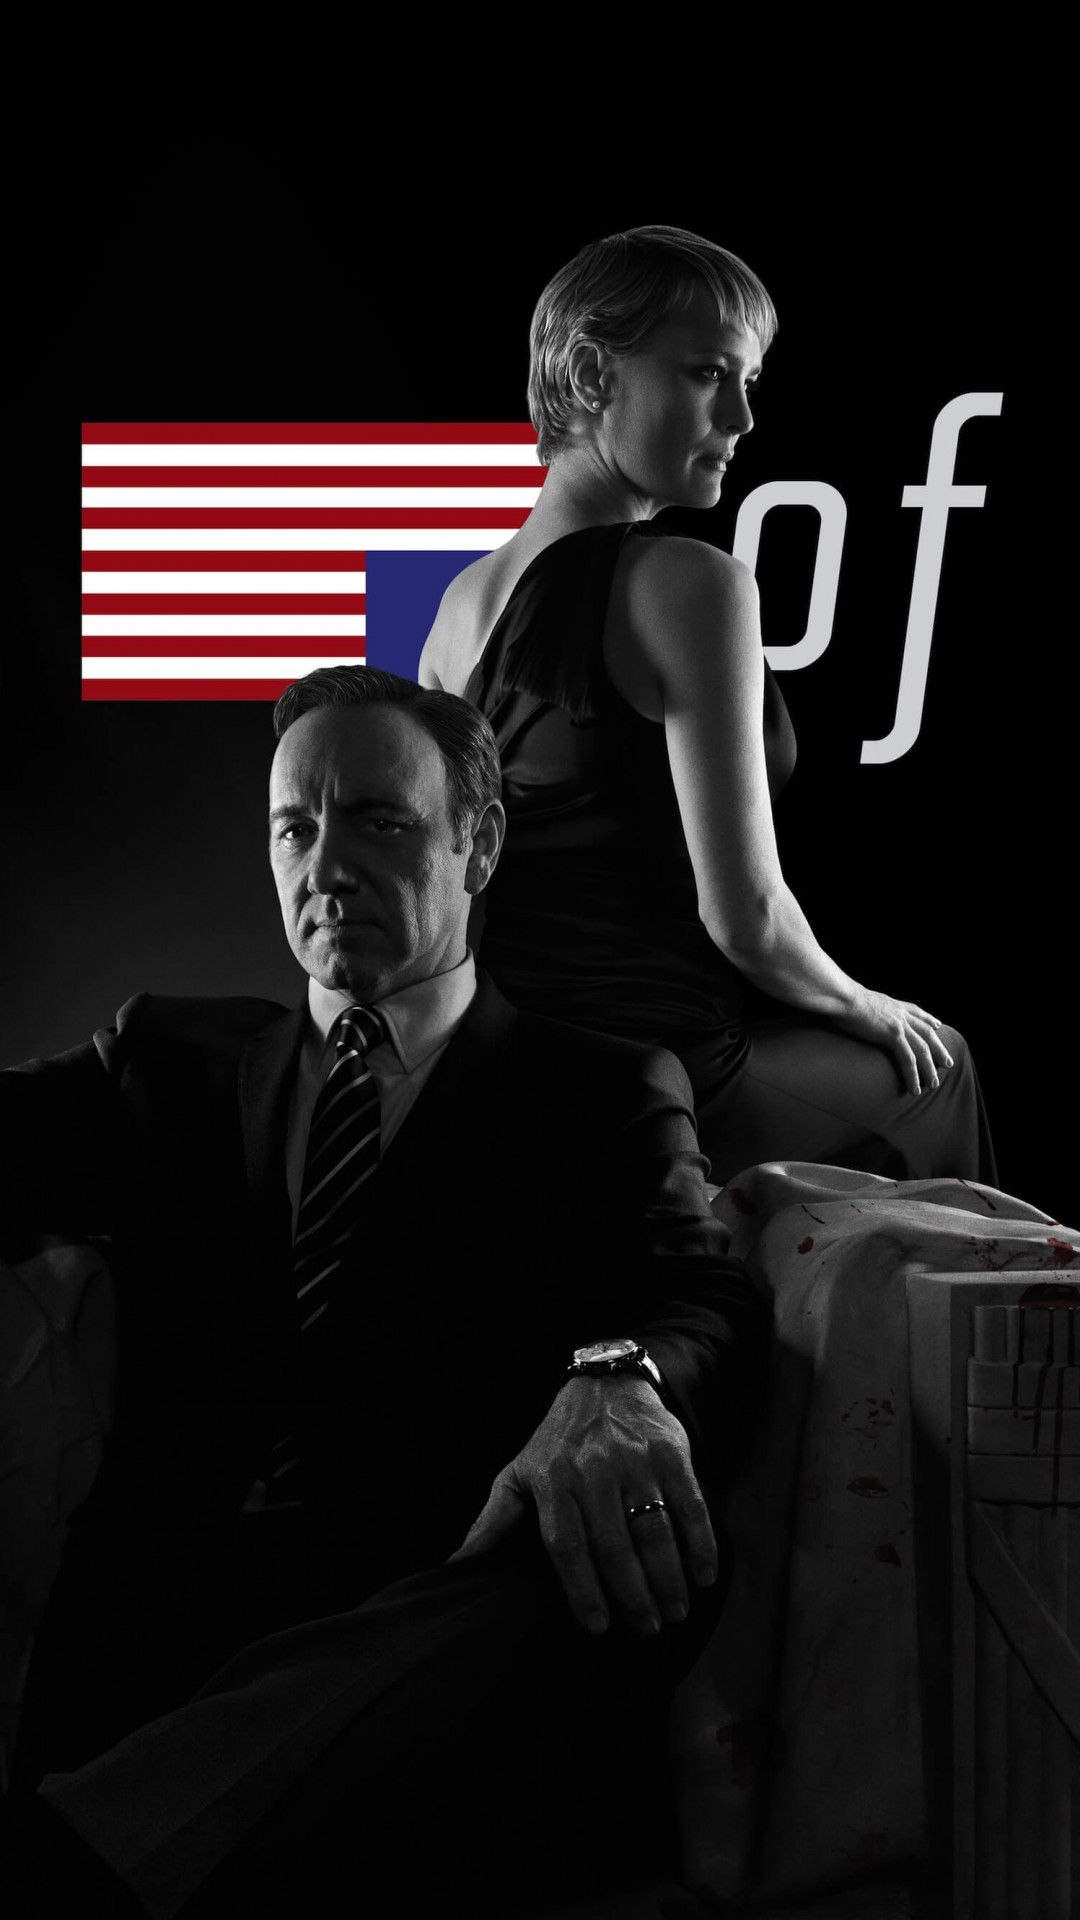 House of Cards - Black & White Wallpaper for SAMSUNG Galaxy S5